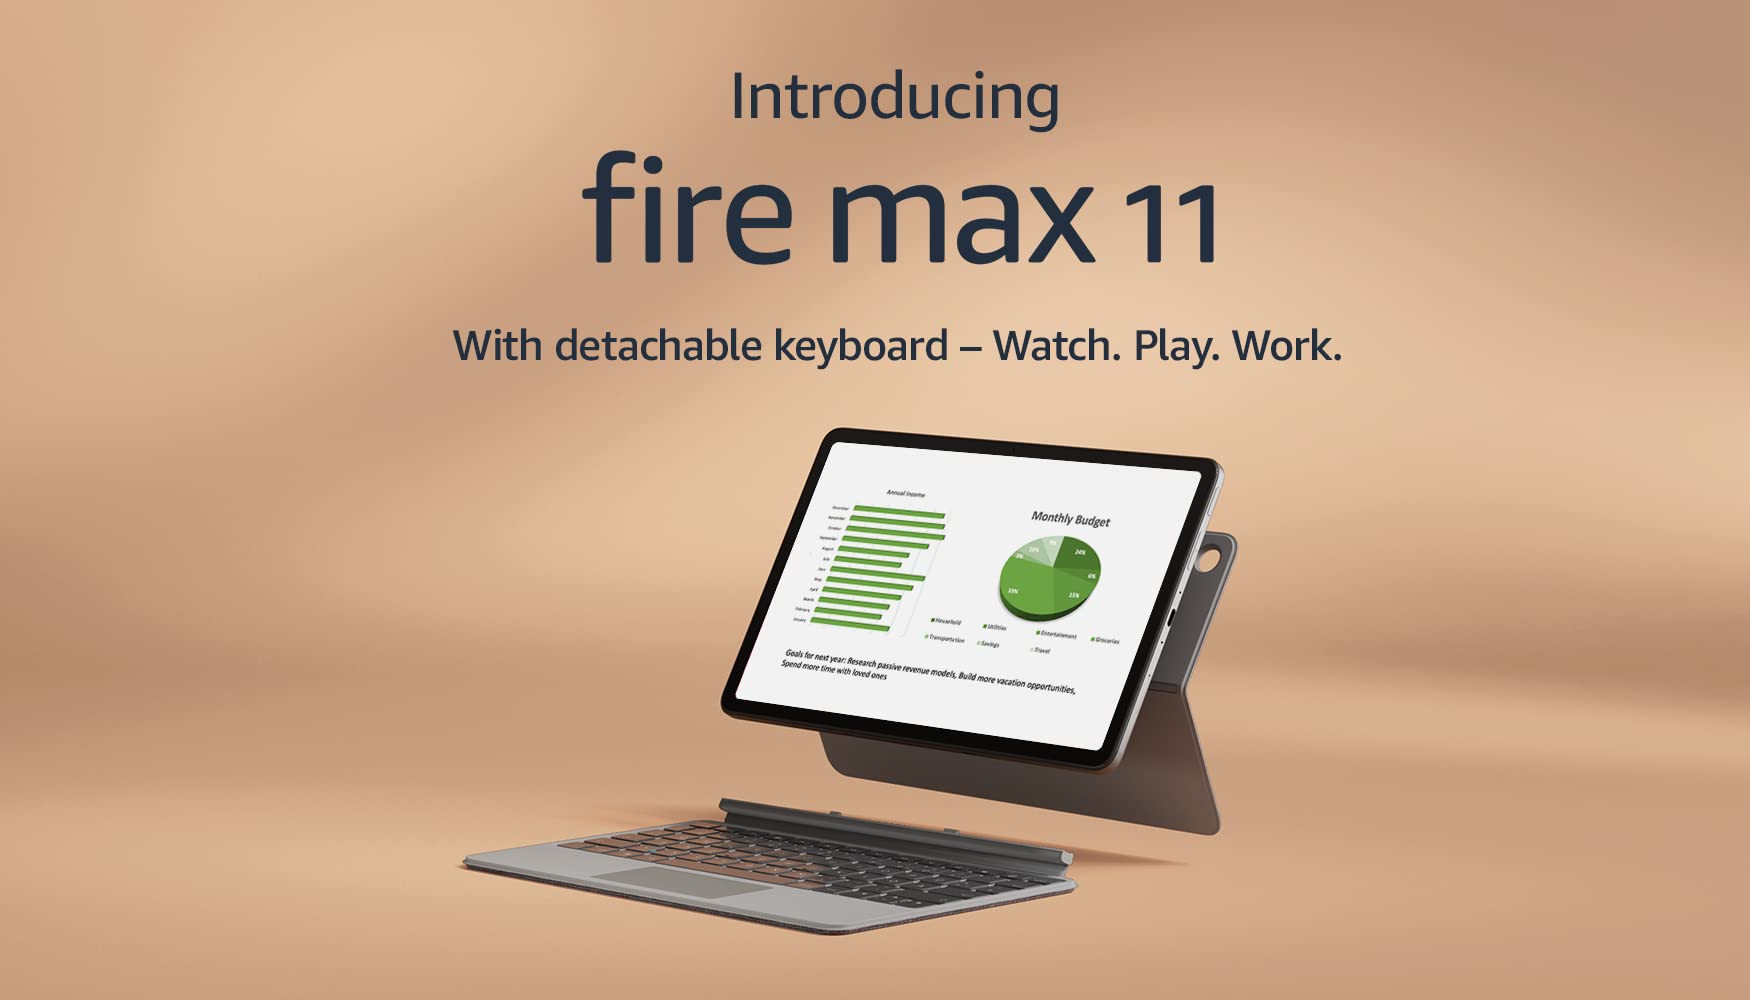 Introducing Amazon Fire Max 11 tablet and Keyboard Case bundle, power, fun, and productivity, octa-core processor, 4 GB RAM, 14-hour battery life, 64 GB, Gray